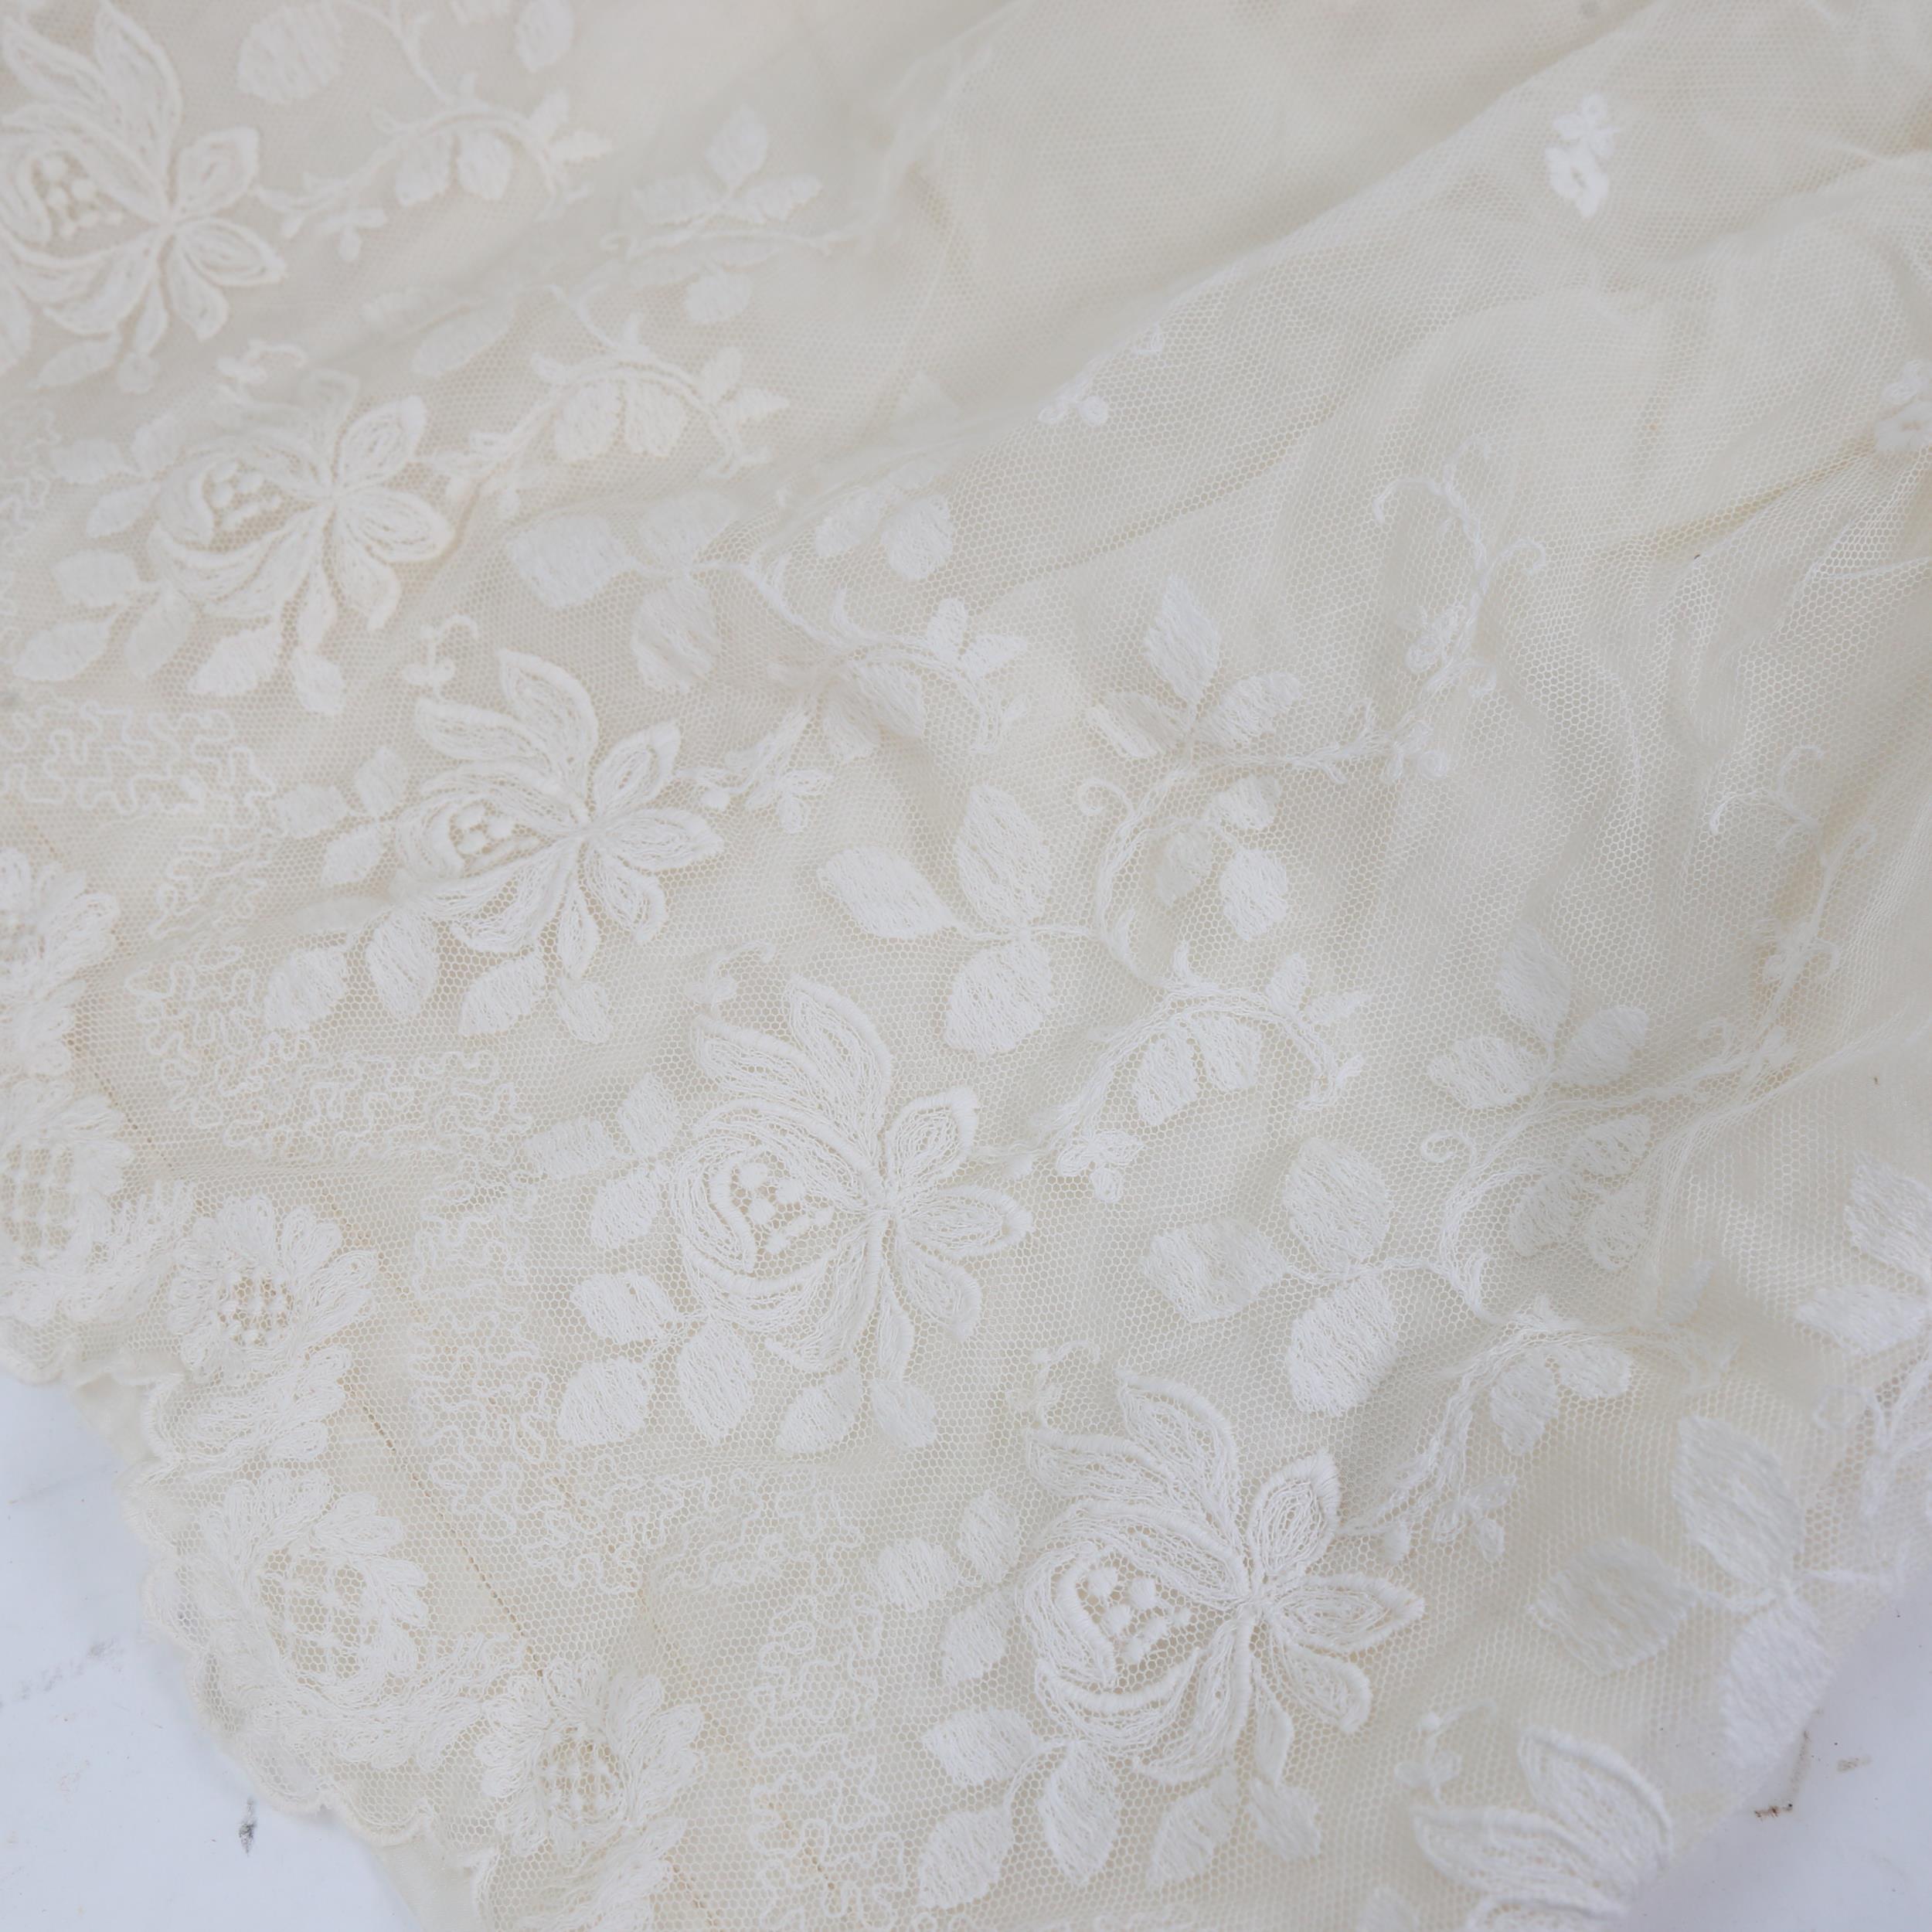 Victorian embroidered lacework christening gown - Image 2 of 2